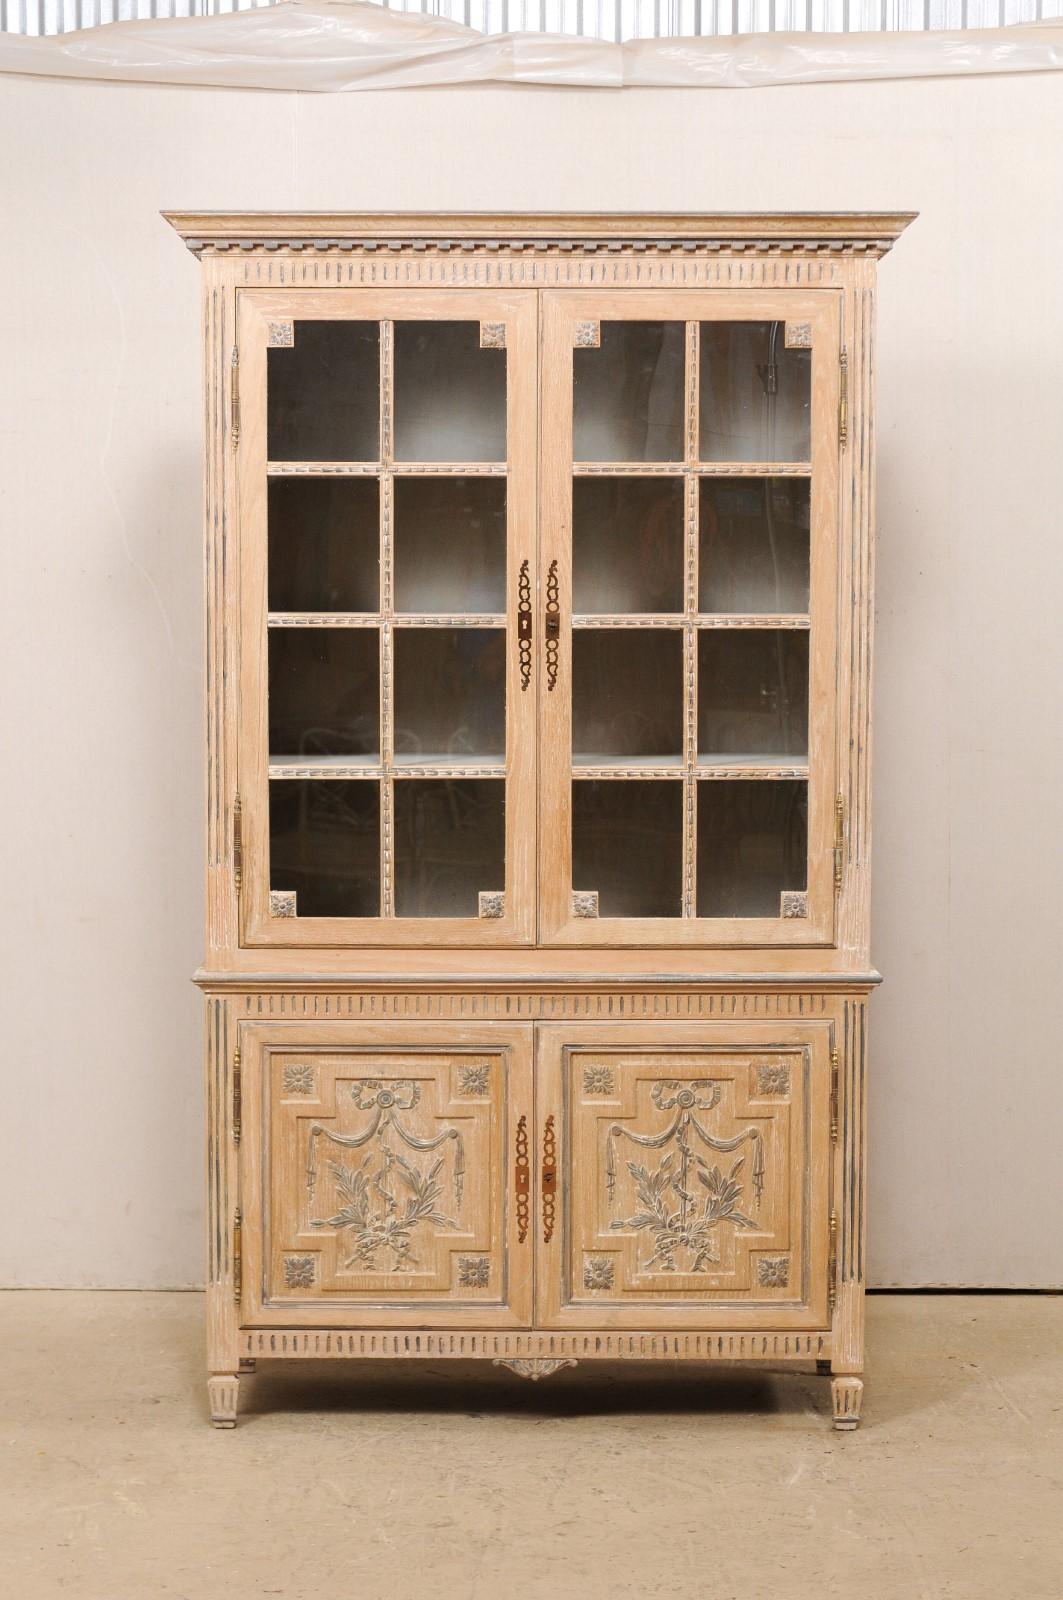 A French tall cabinet from the mid 20th century. This vintage cabinet from France, which stands approximately 7.25 ft tall, has been designed with a Neoclassical influence, which is apparent in the nice dentil molding found beneath the upper